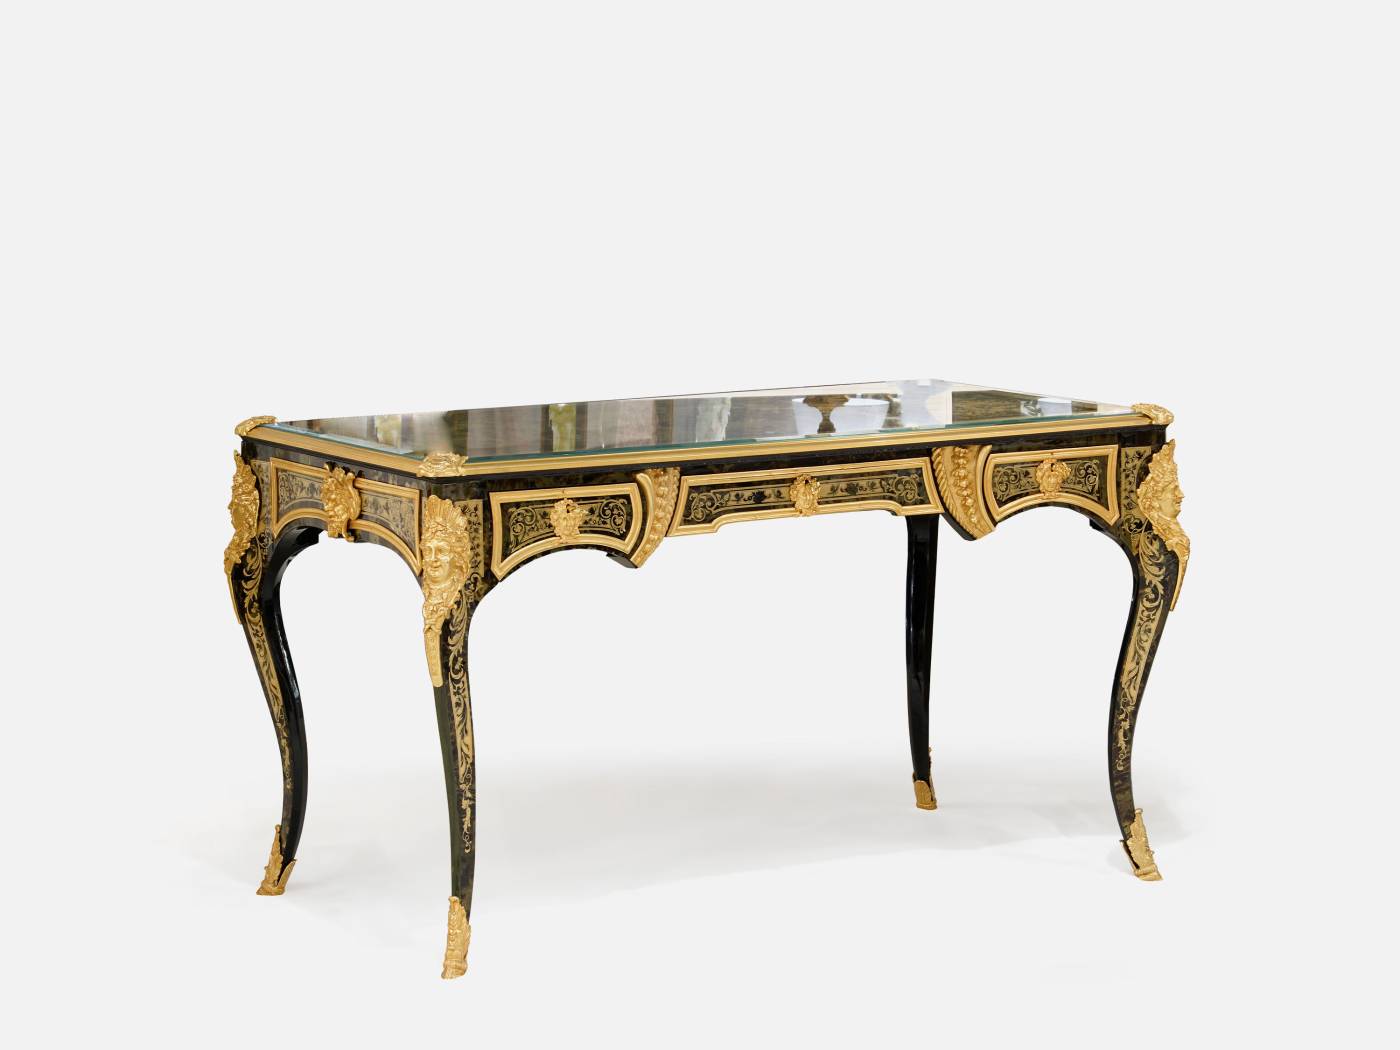 ART. 2196 – C.G. Capelletti Italian Luxury Classic Desks and writing desks. Transform your space with sophisticated made in italy classic interior design.